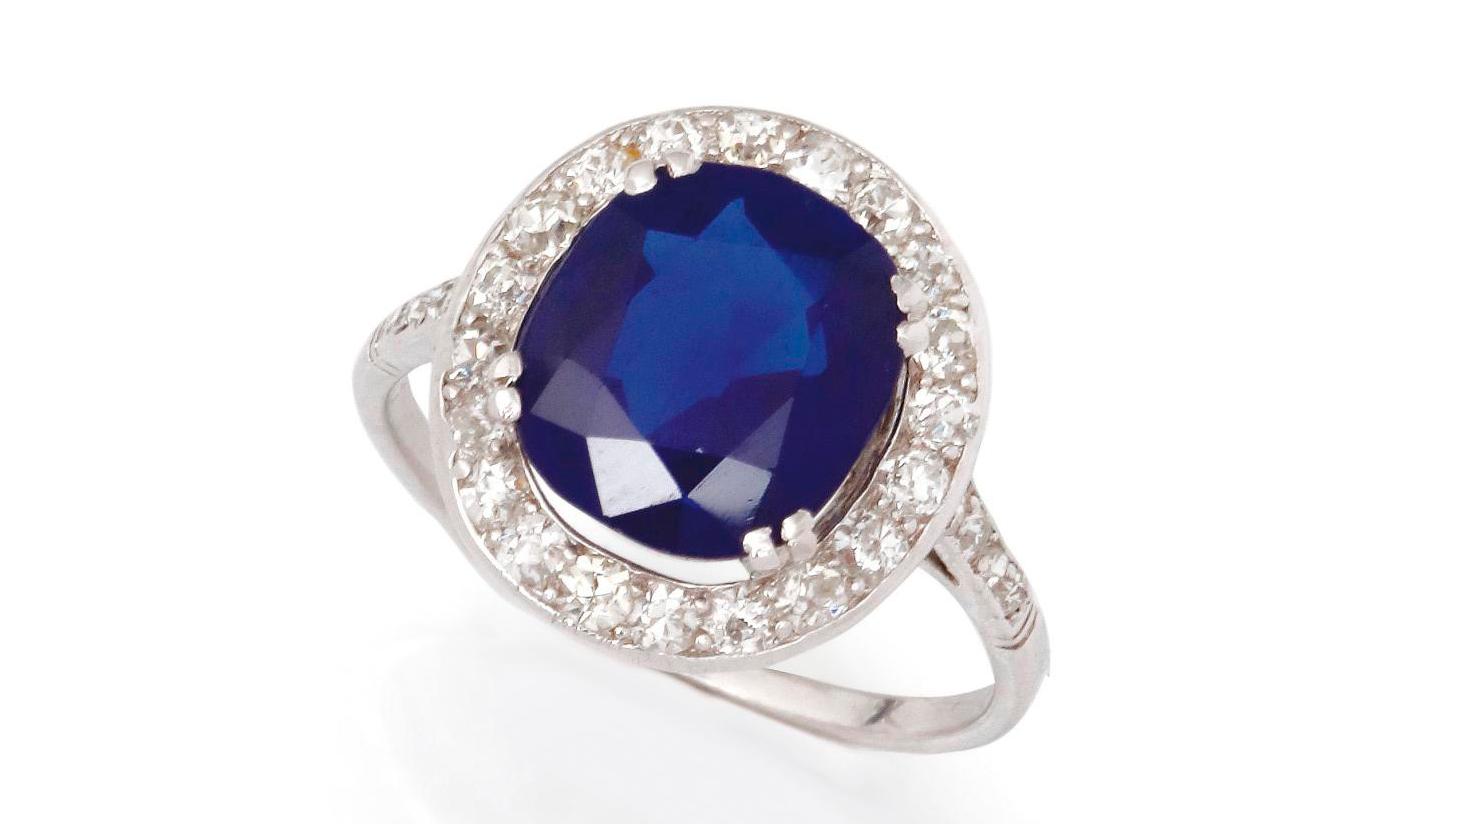 Platinum ring with an oval 3.60-carat Kashmir sapphire surrounded by old-cut 8-8... Kashmir Blue: The Color of Rarity